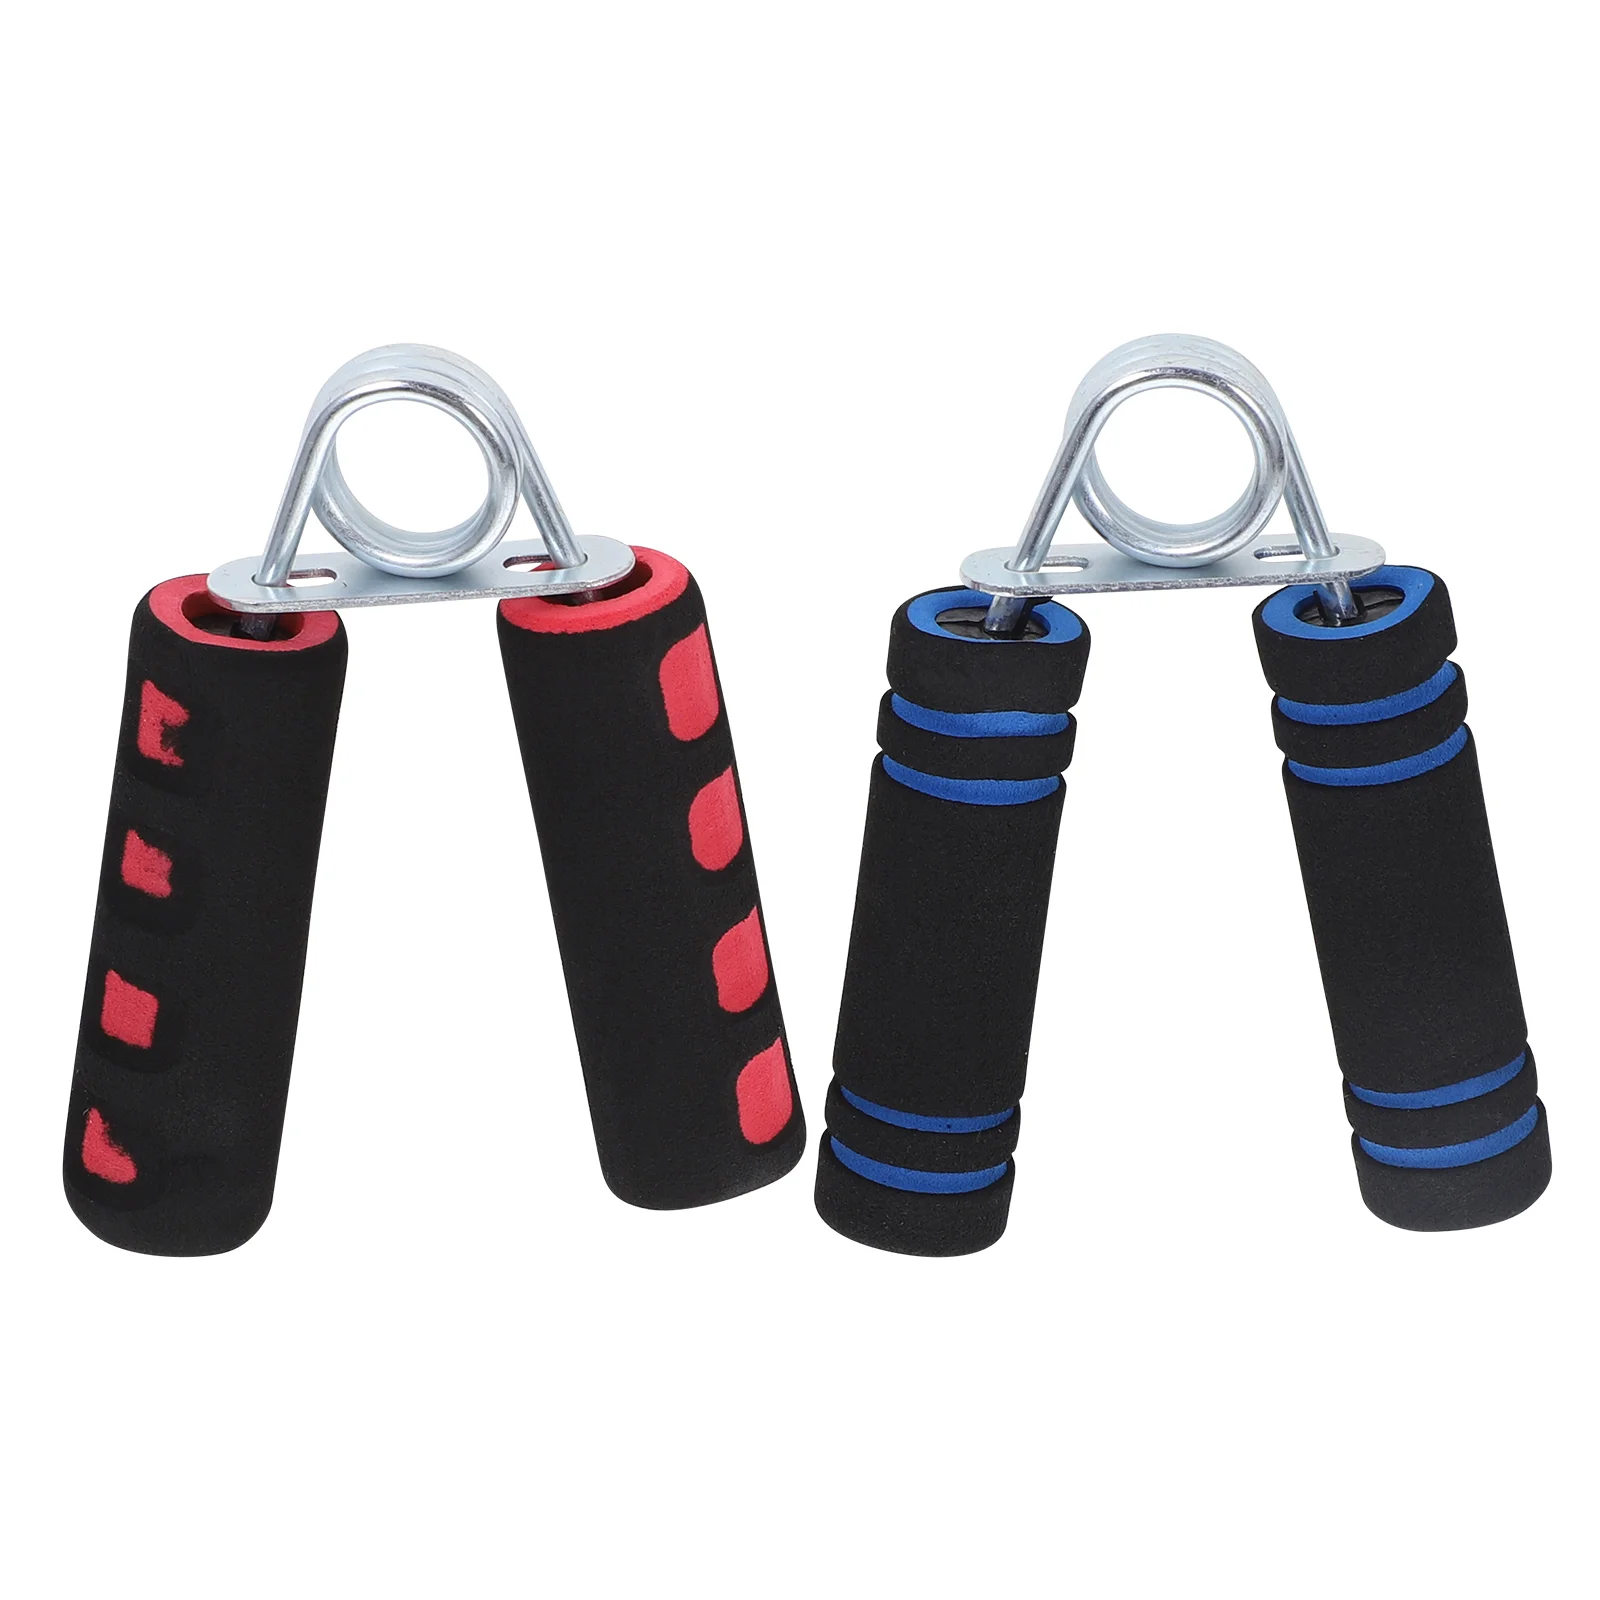 

Hand Grip Strength Strengther Grips Workout Wrist Trainer Squeezer Gripper Strengthener Expander Hands Exercisers Training